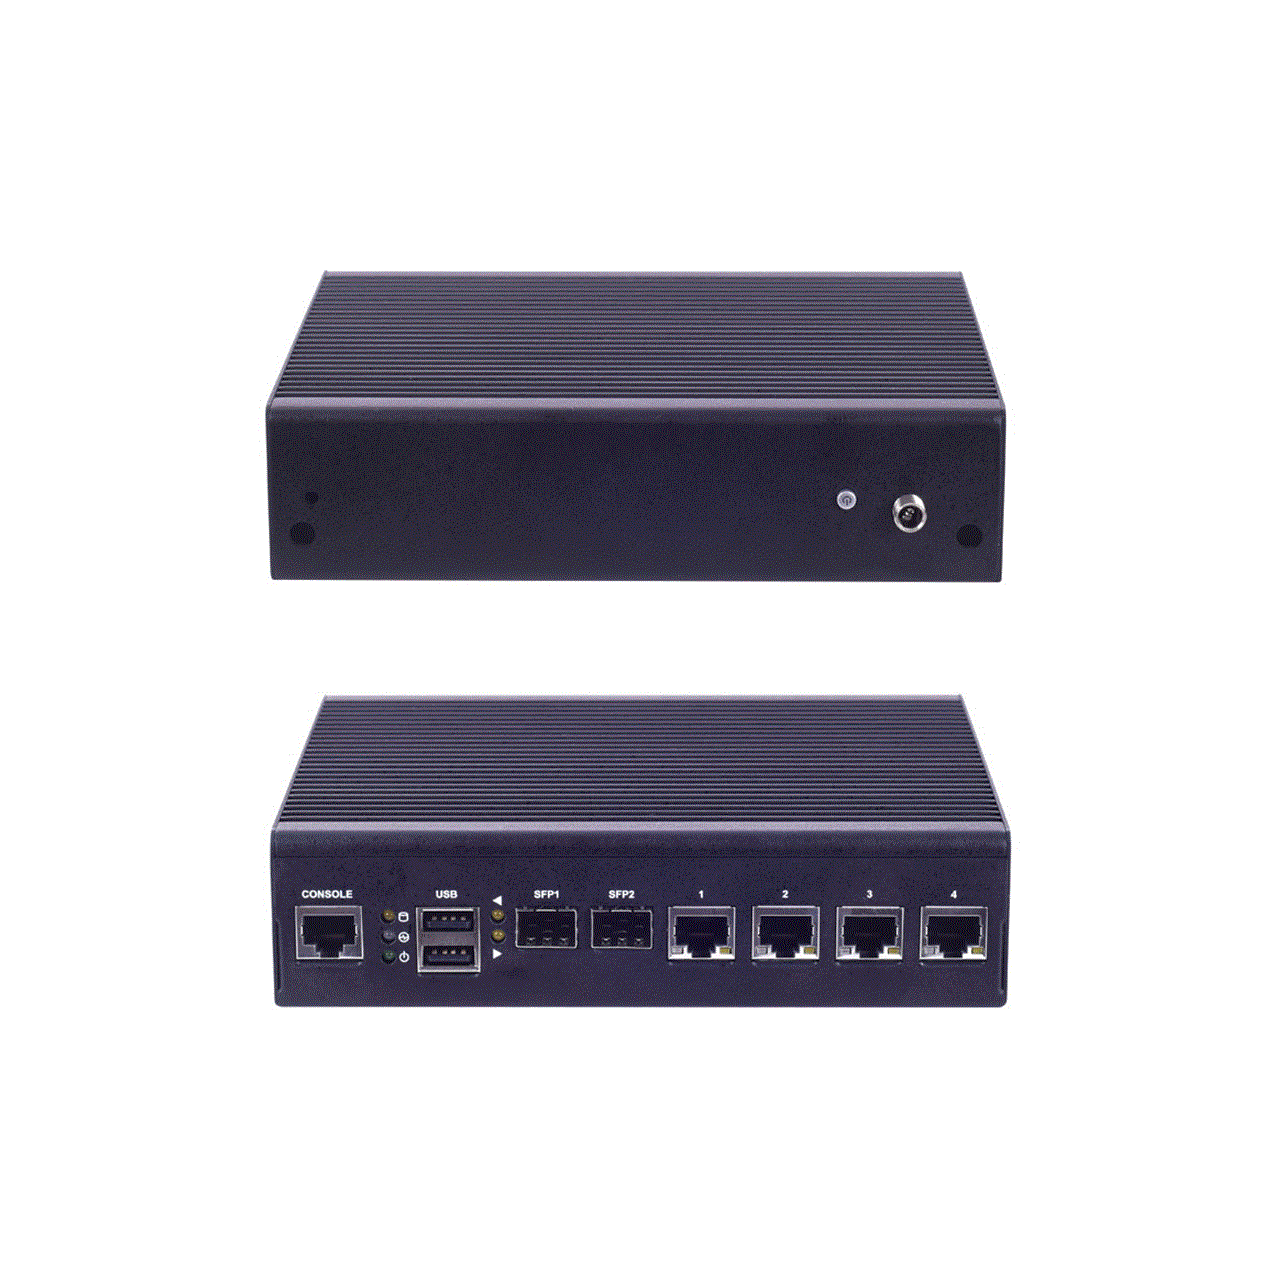 fanless-desktop-x86-network-appliance-with-4-rj45-gbe-and-2-sfp-gbe-ports